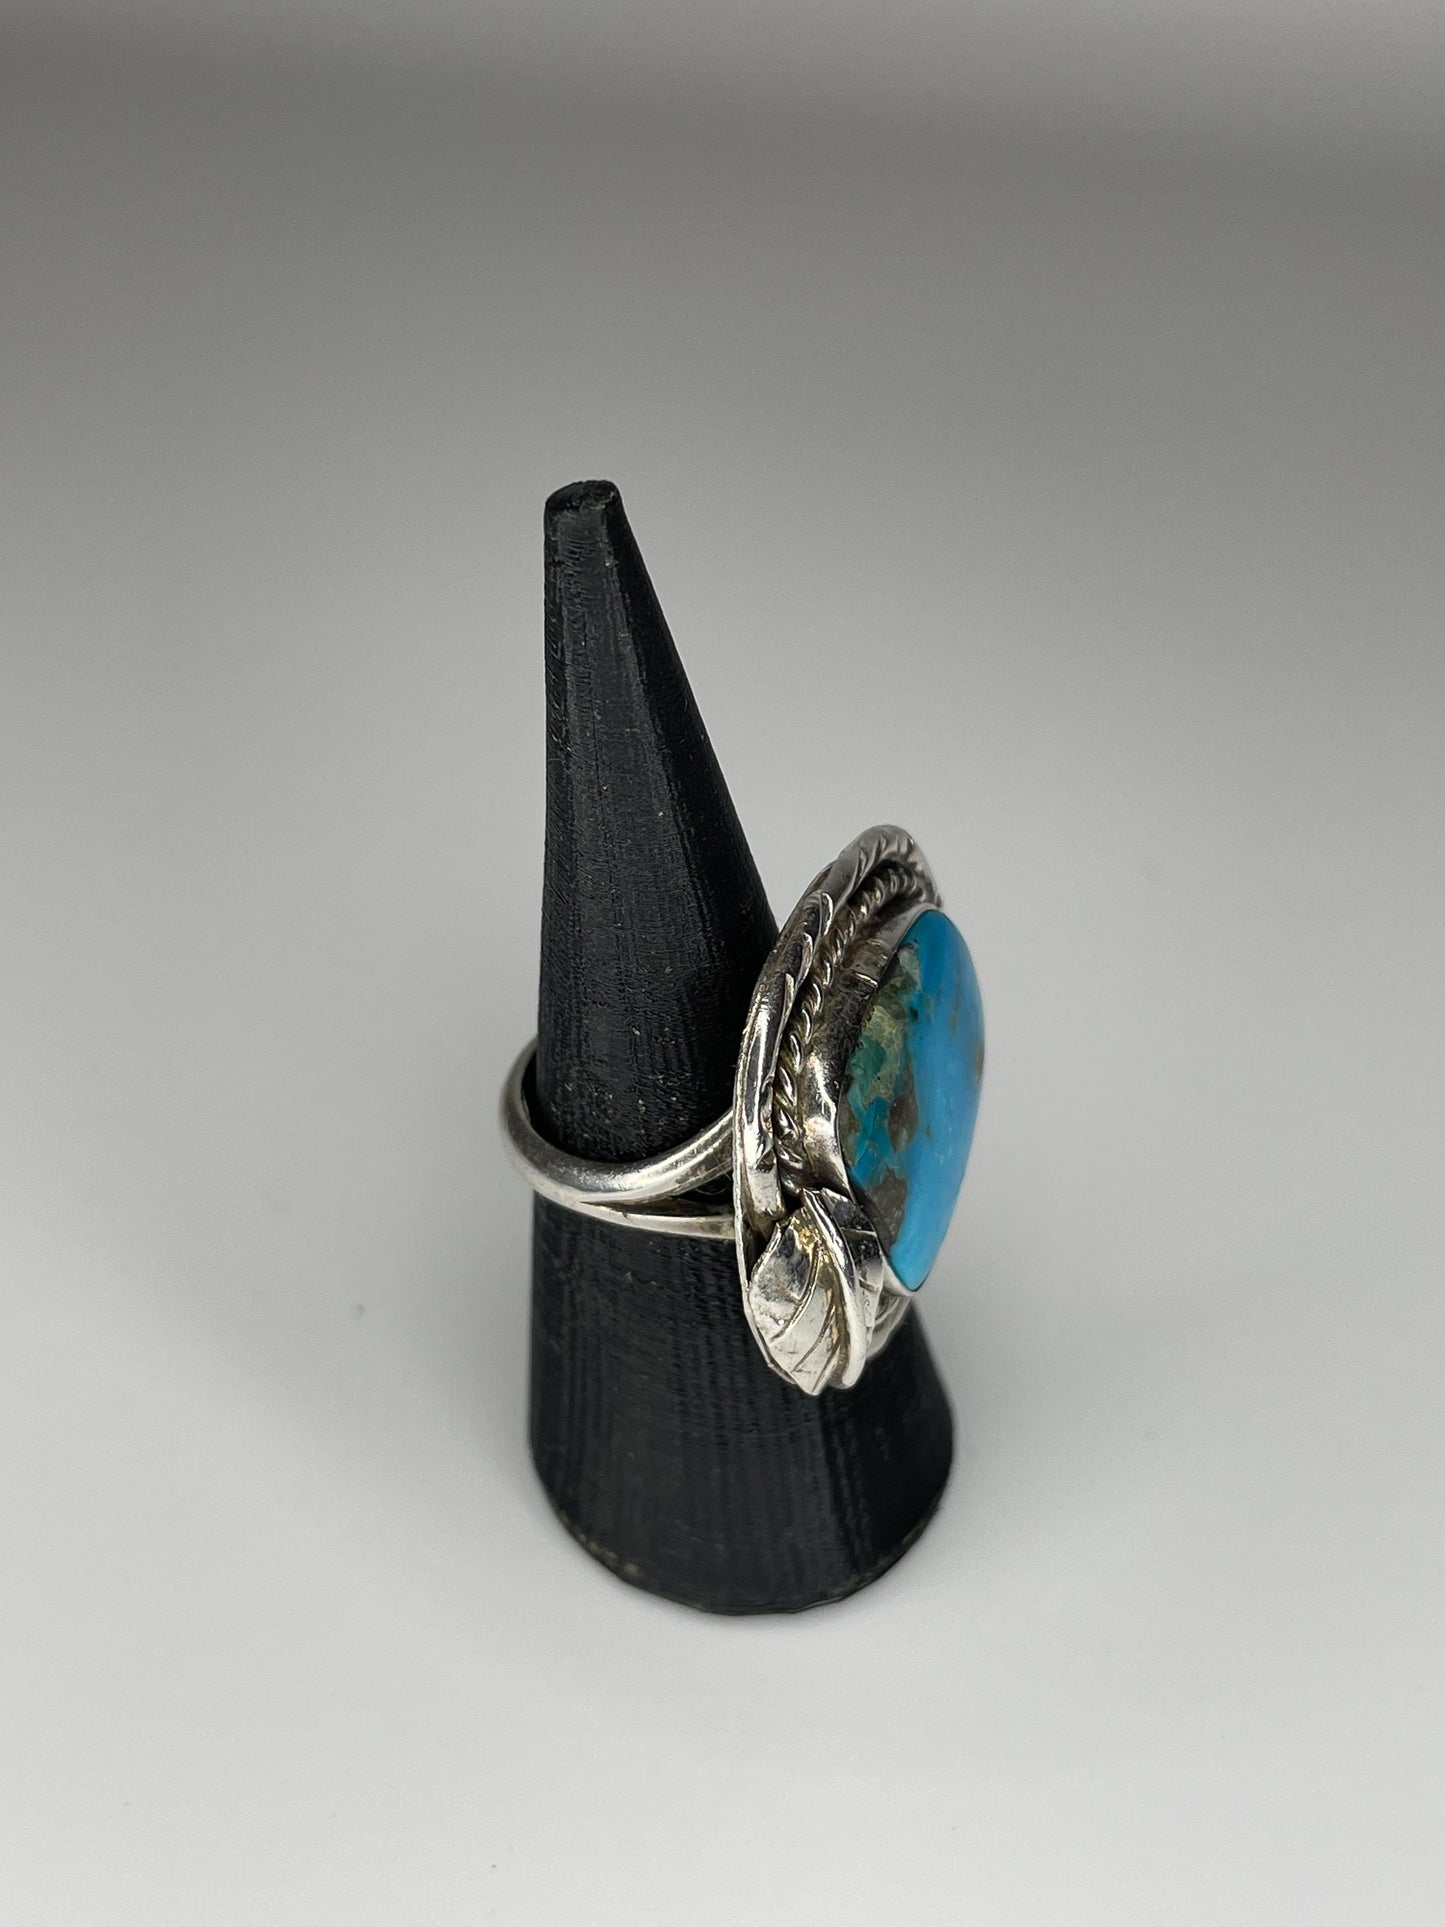 Vintage Sterling Silver Pear Shaped Turquoise Ring with Feather Size 5.5